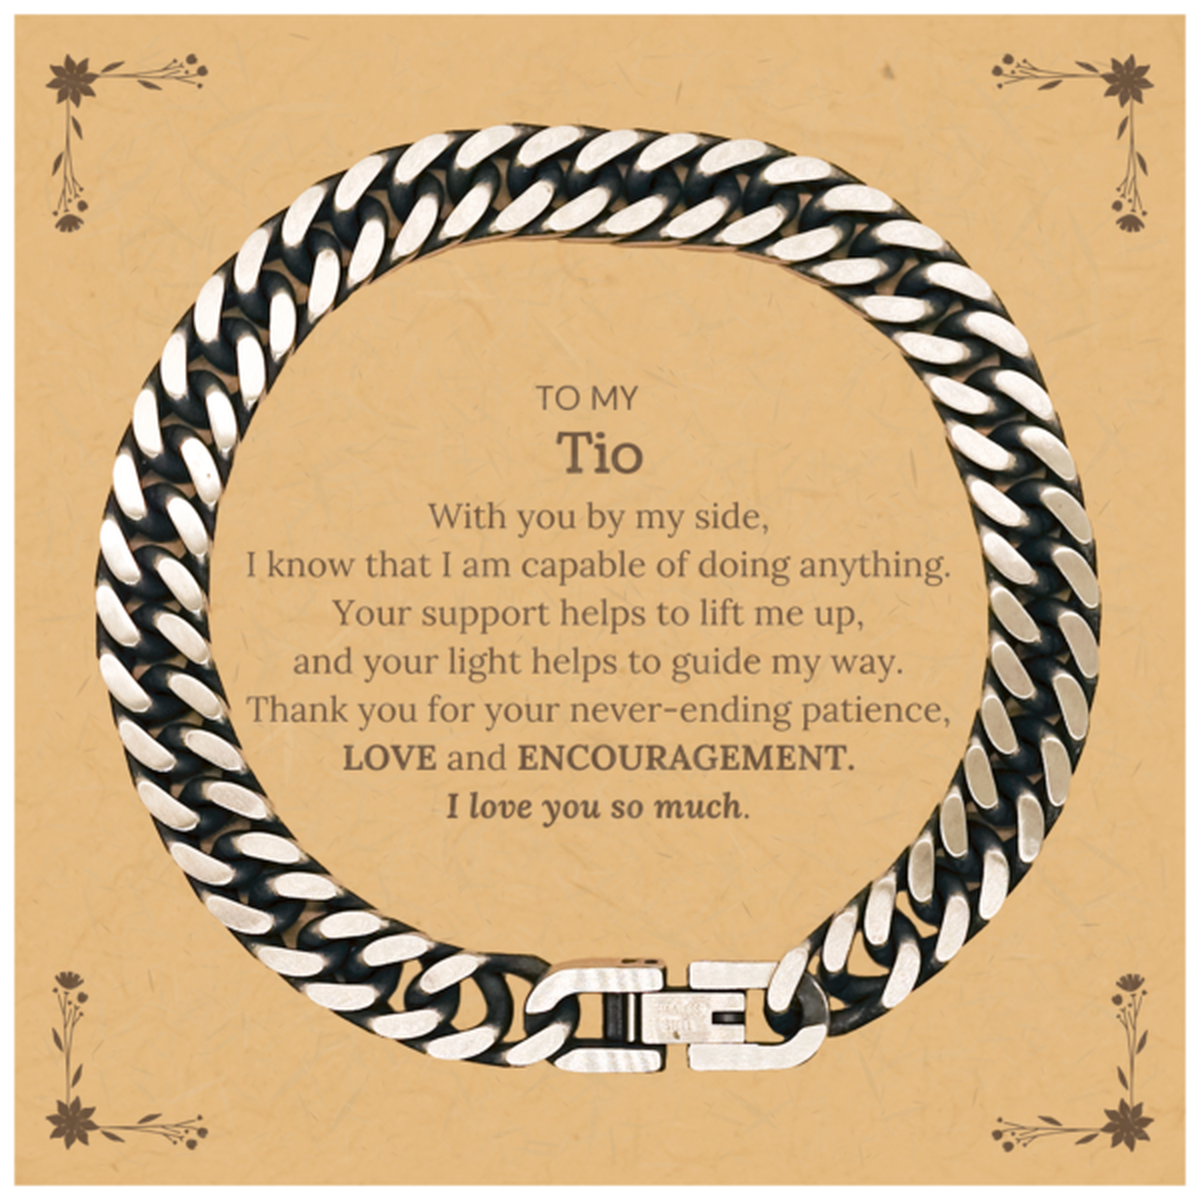 Appreciation Tio Cuban Link Chain Bracelet Gifts, To My Tio Birthday Christmas Wedding Keepsake Gifts for Tio With you by my side, I know that I am capable of doing anything. I love you so much